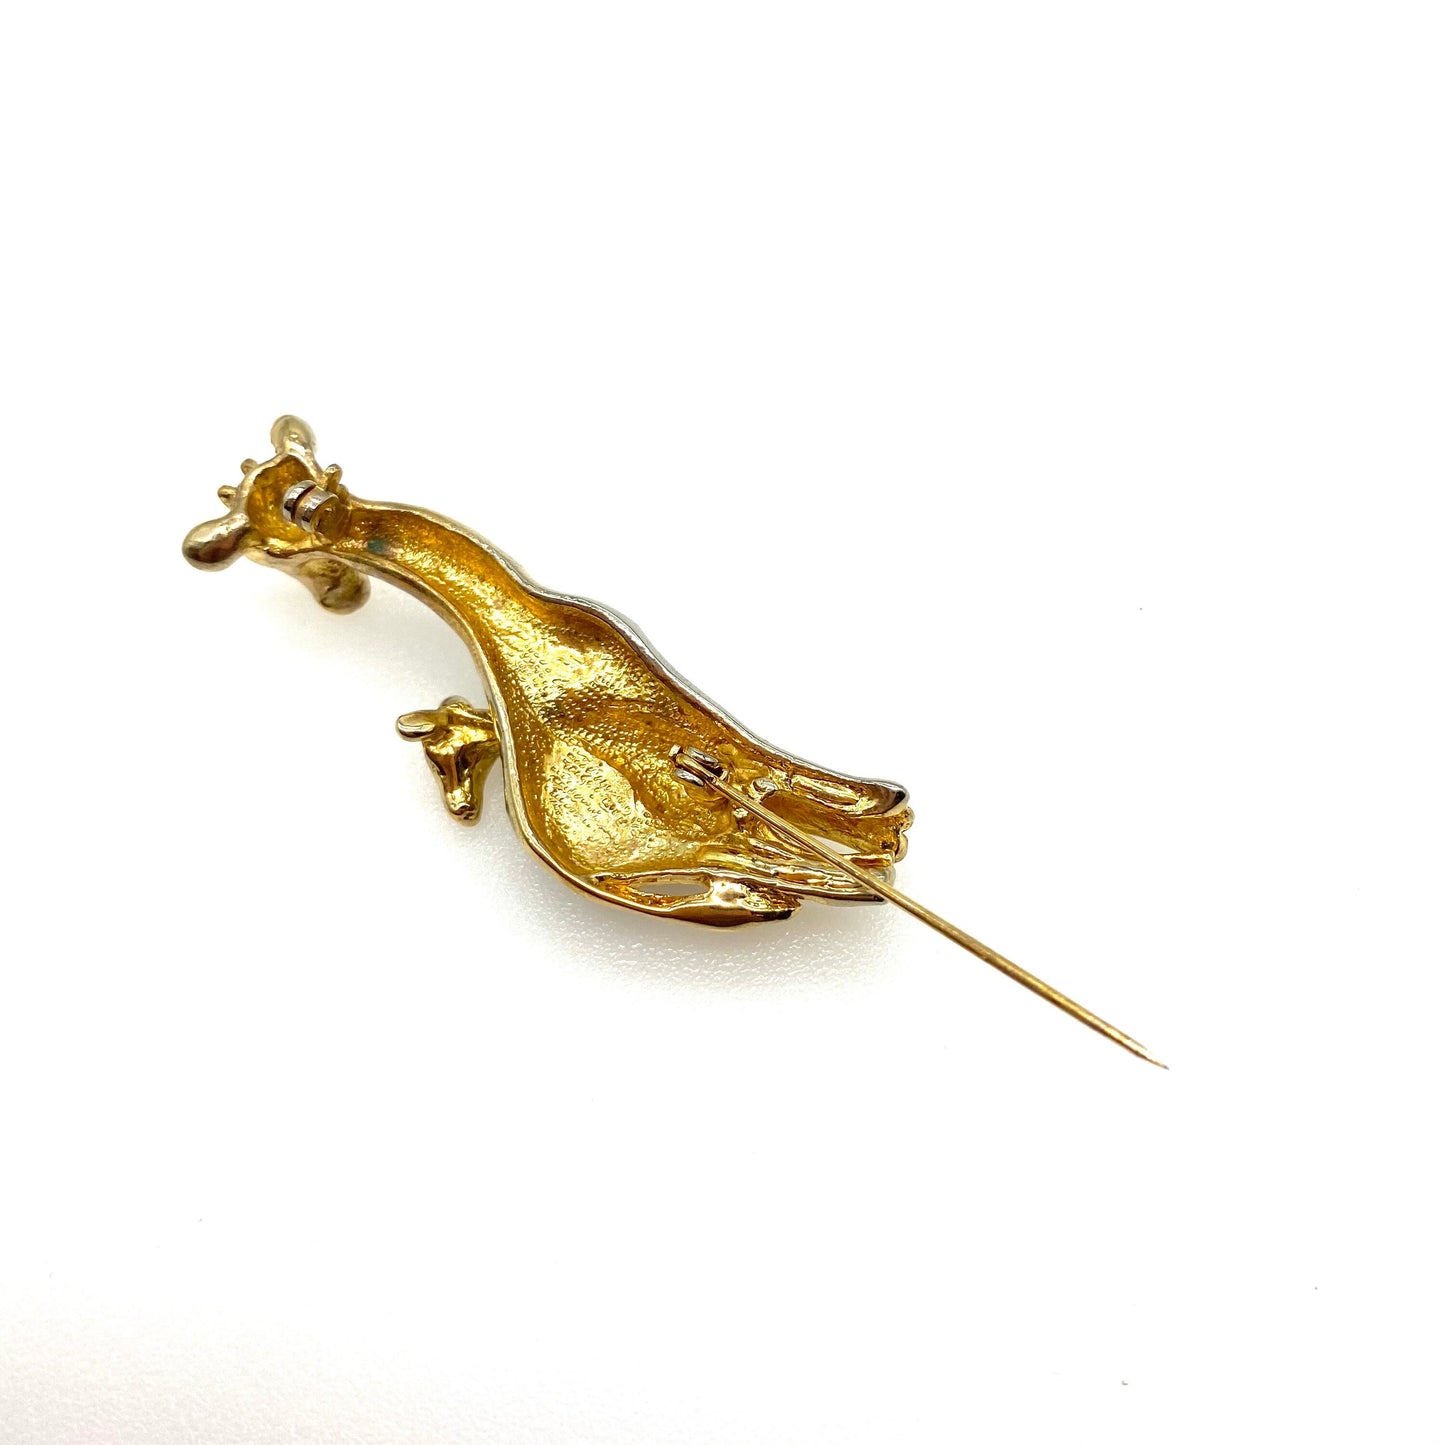 UNSIGNED Attwood and Sawyer 22ct Gold Plated Giraffe Mother and Calf Brooch Black Enamel Colourway